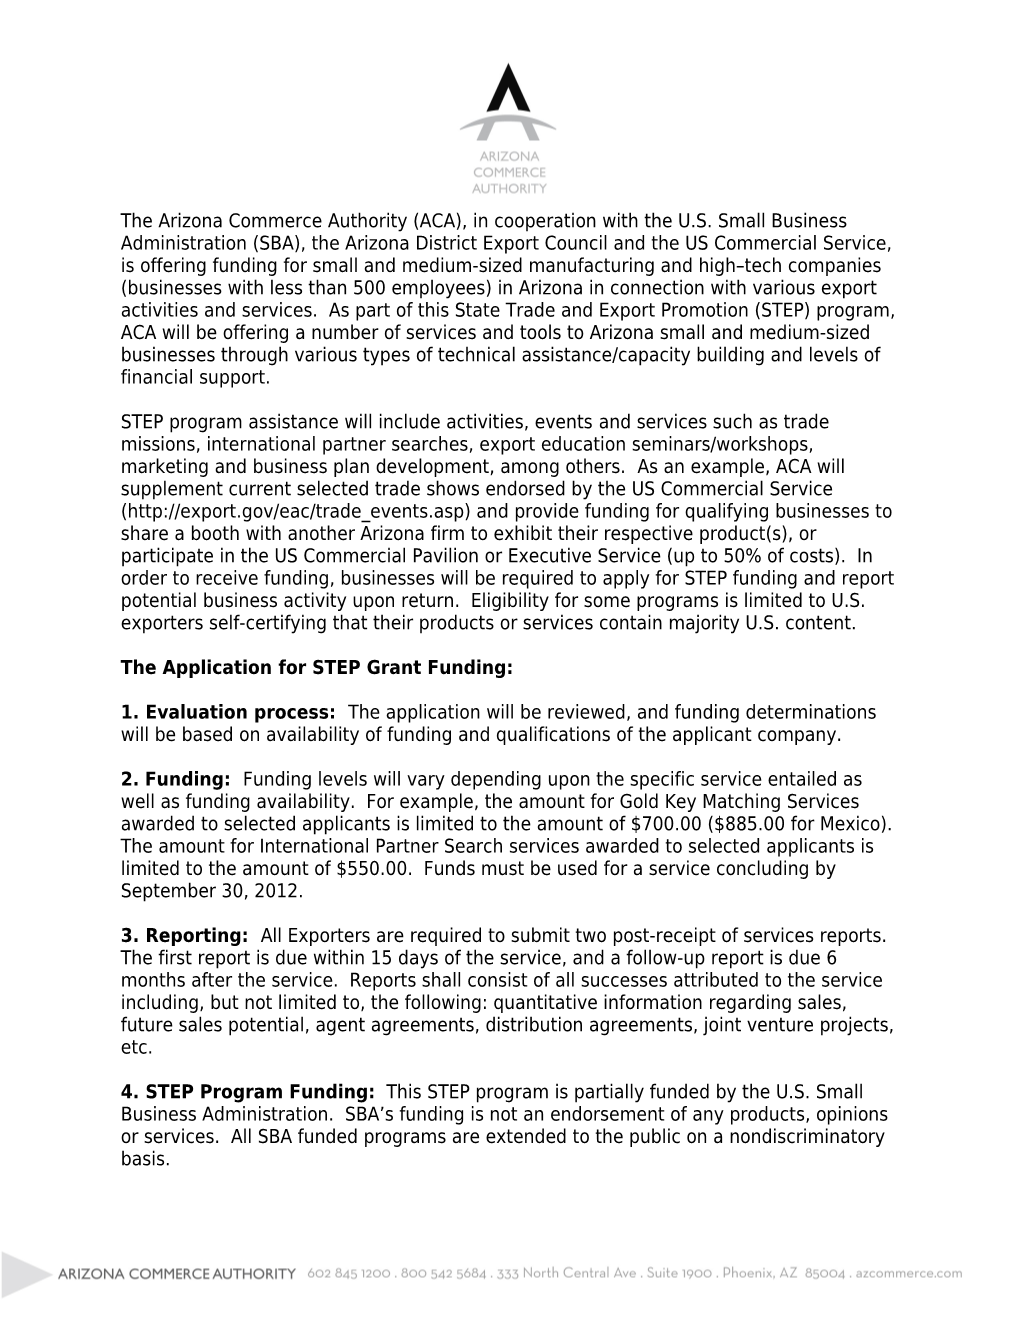 The Application for STEP Grant Funding